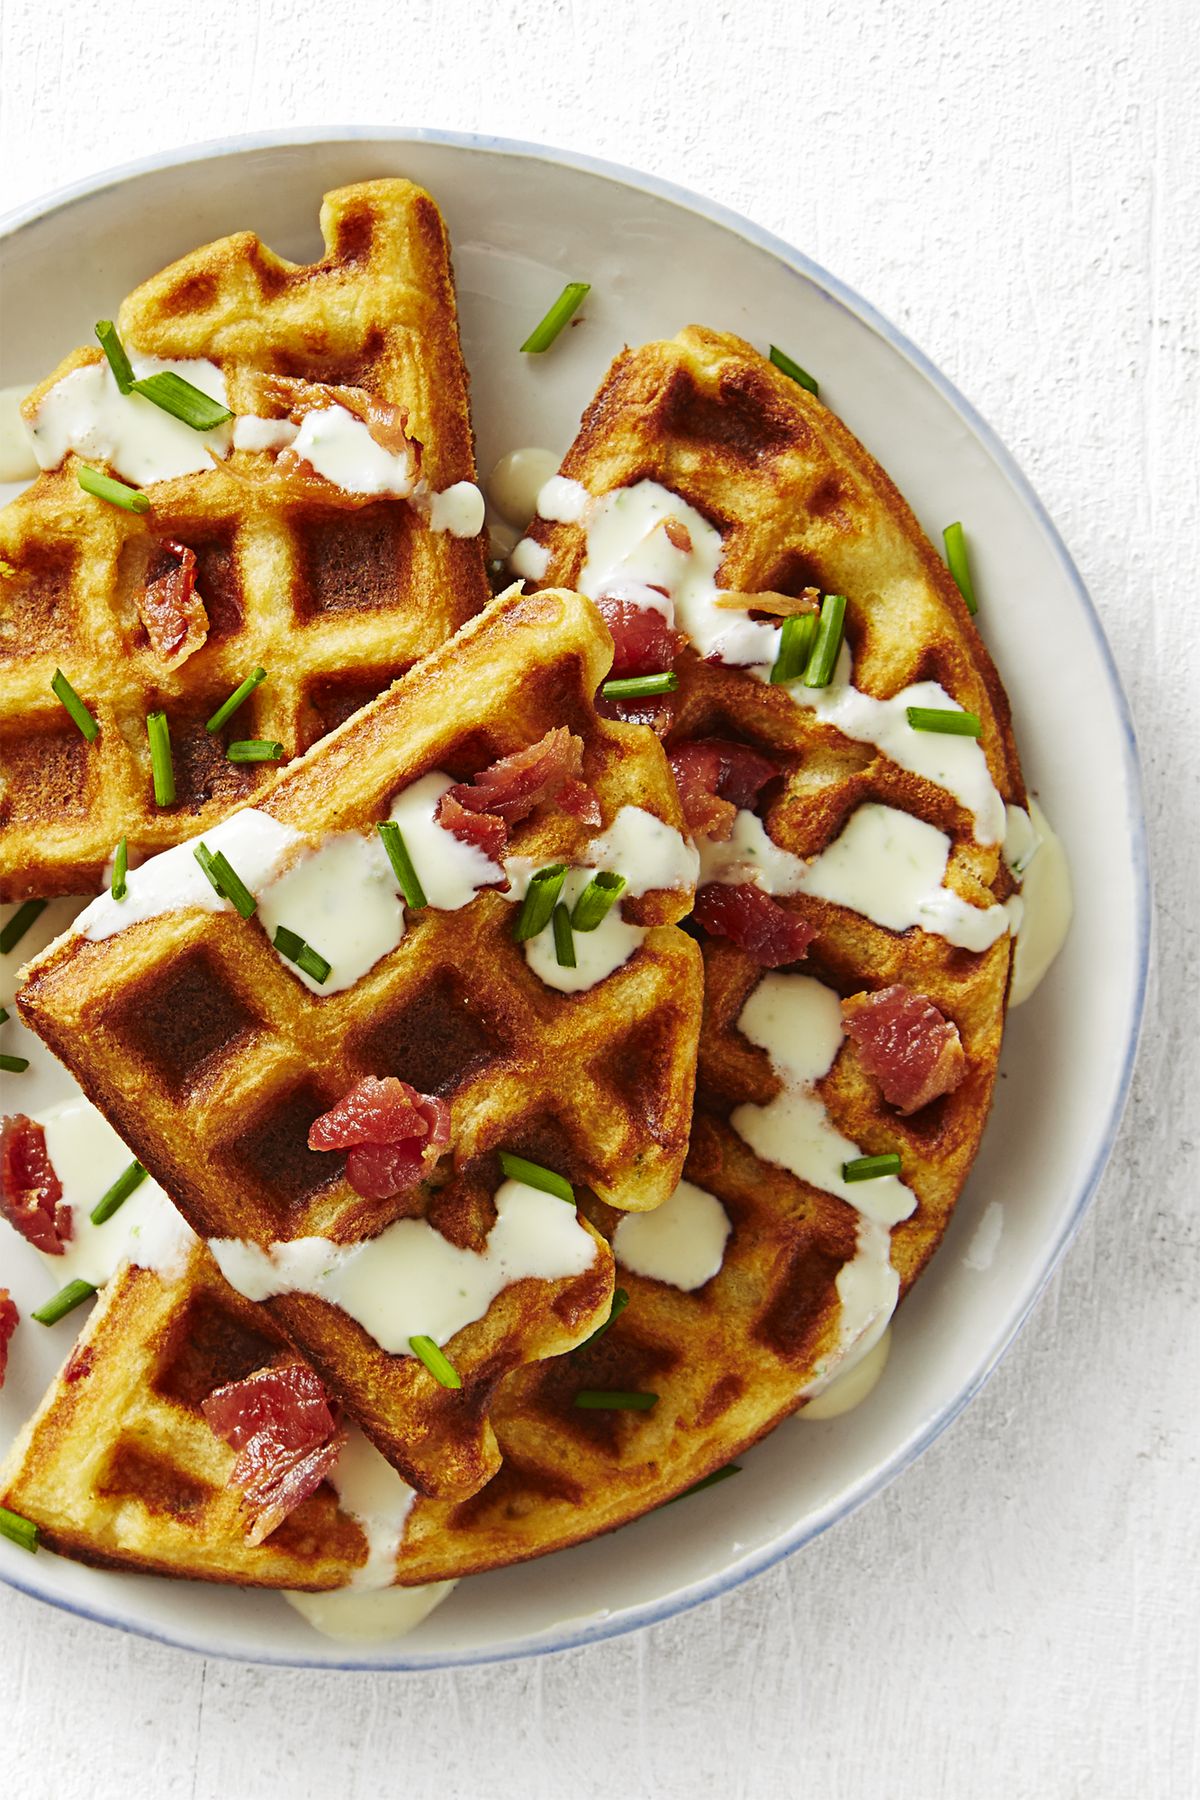  savory bacon and chive waffles on a white plate